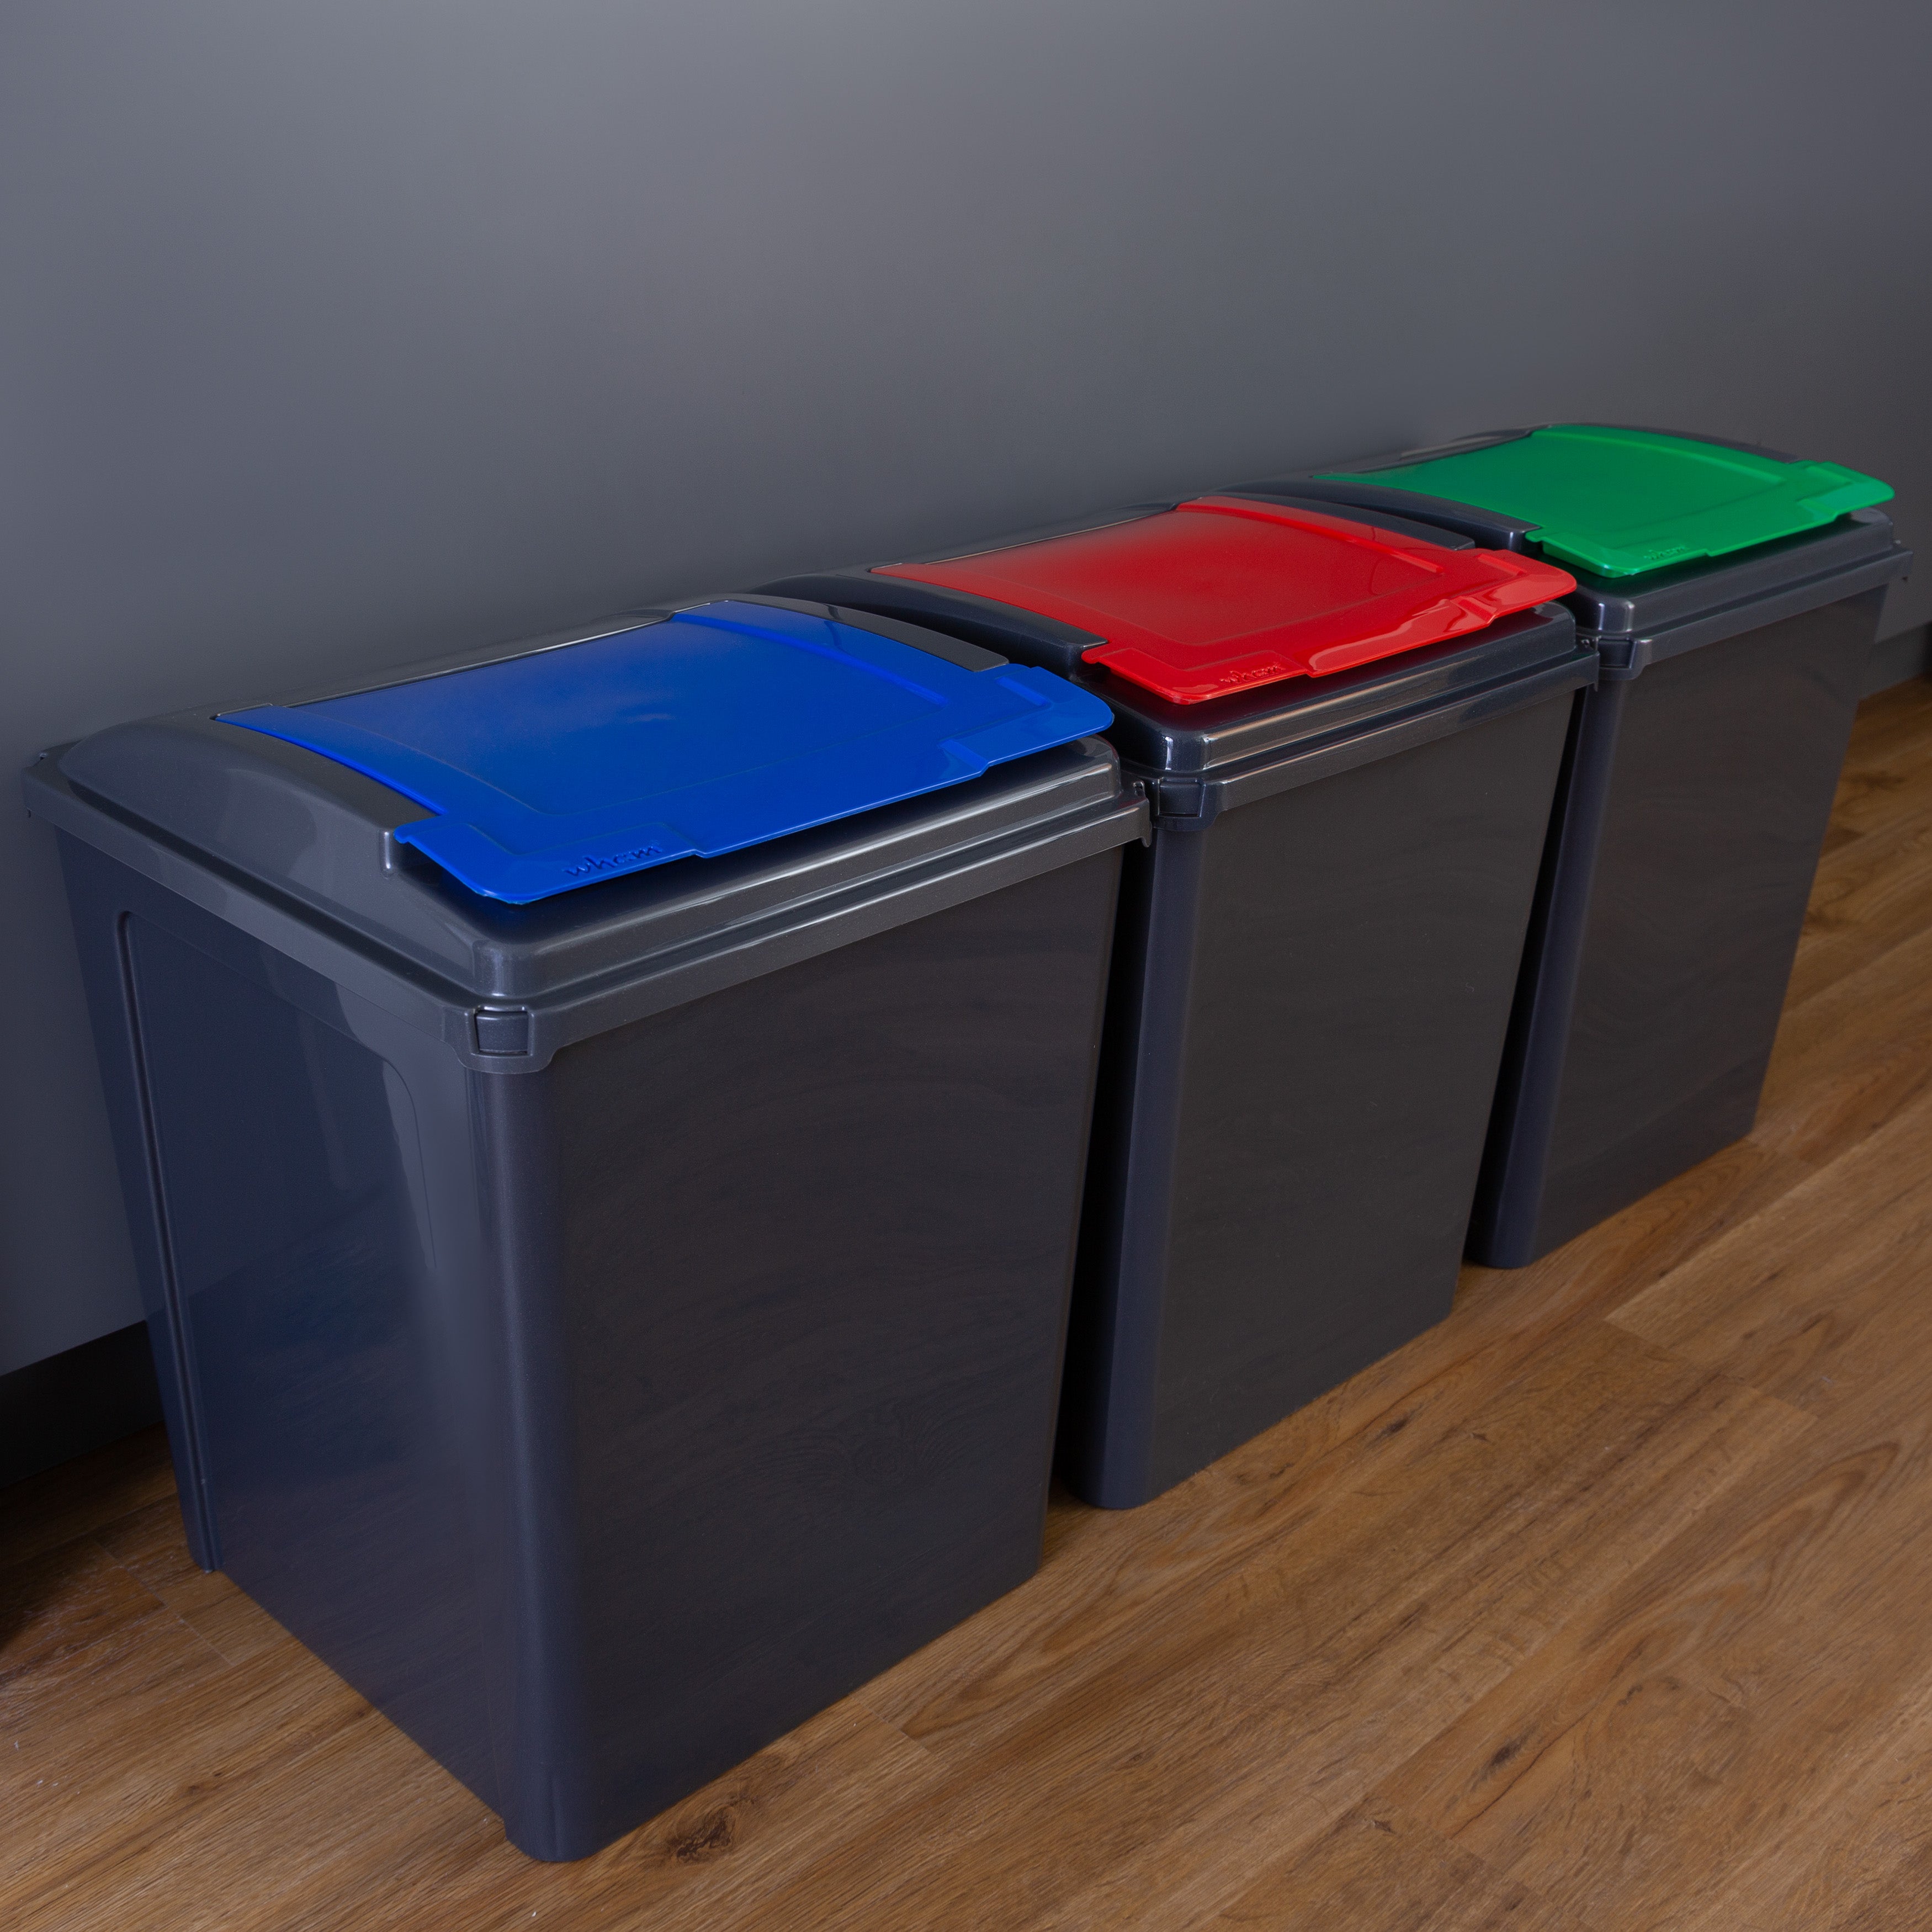 Wham 50L Set of 3 Recycling Bins with Red, Blue, & Green Lids | Dunelm